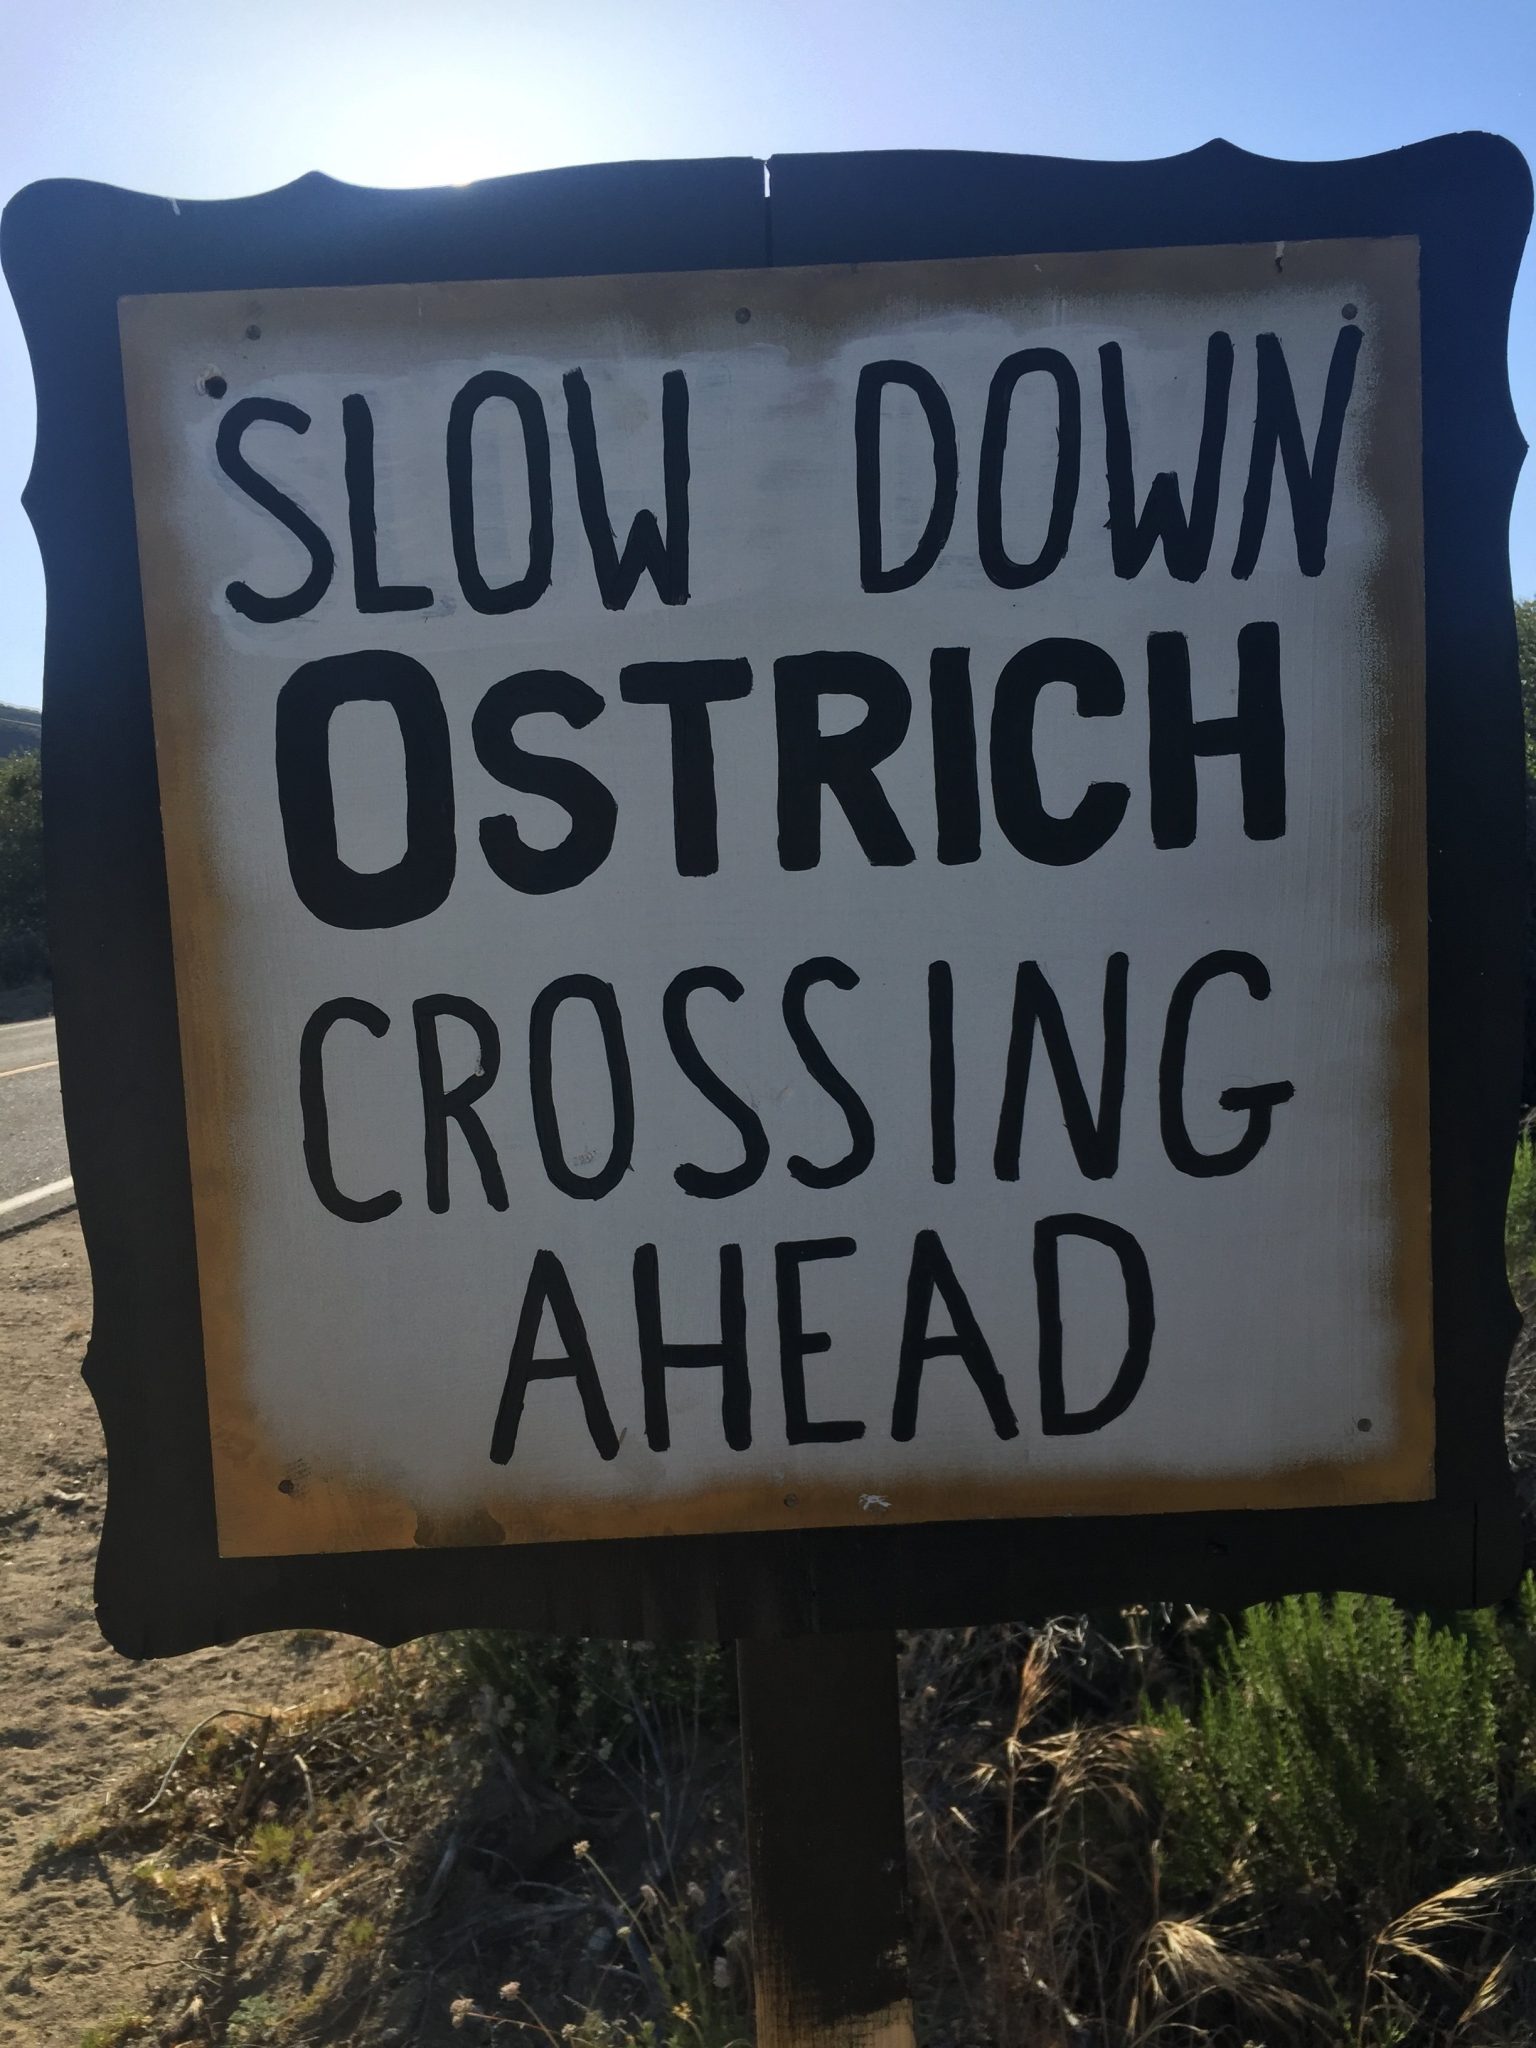 Ostrich crossing sign